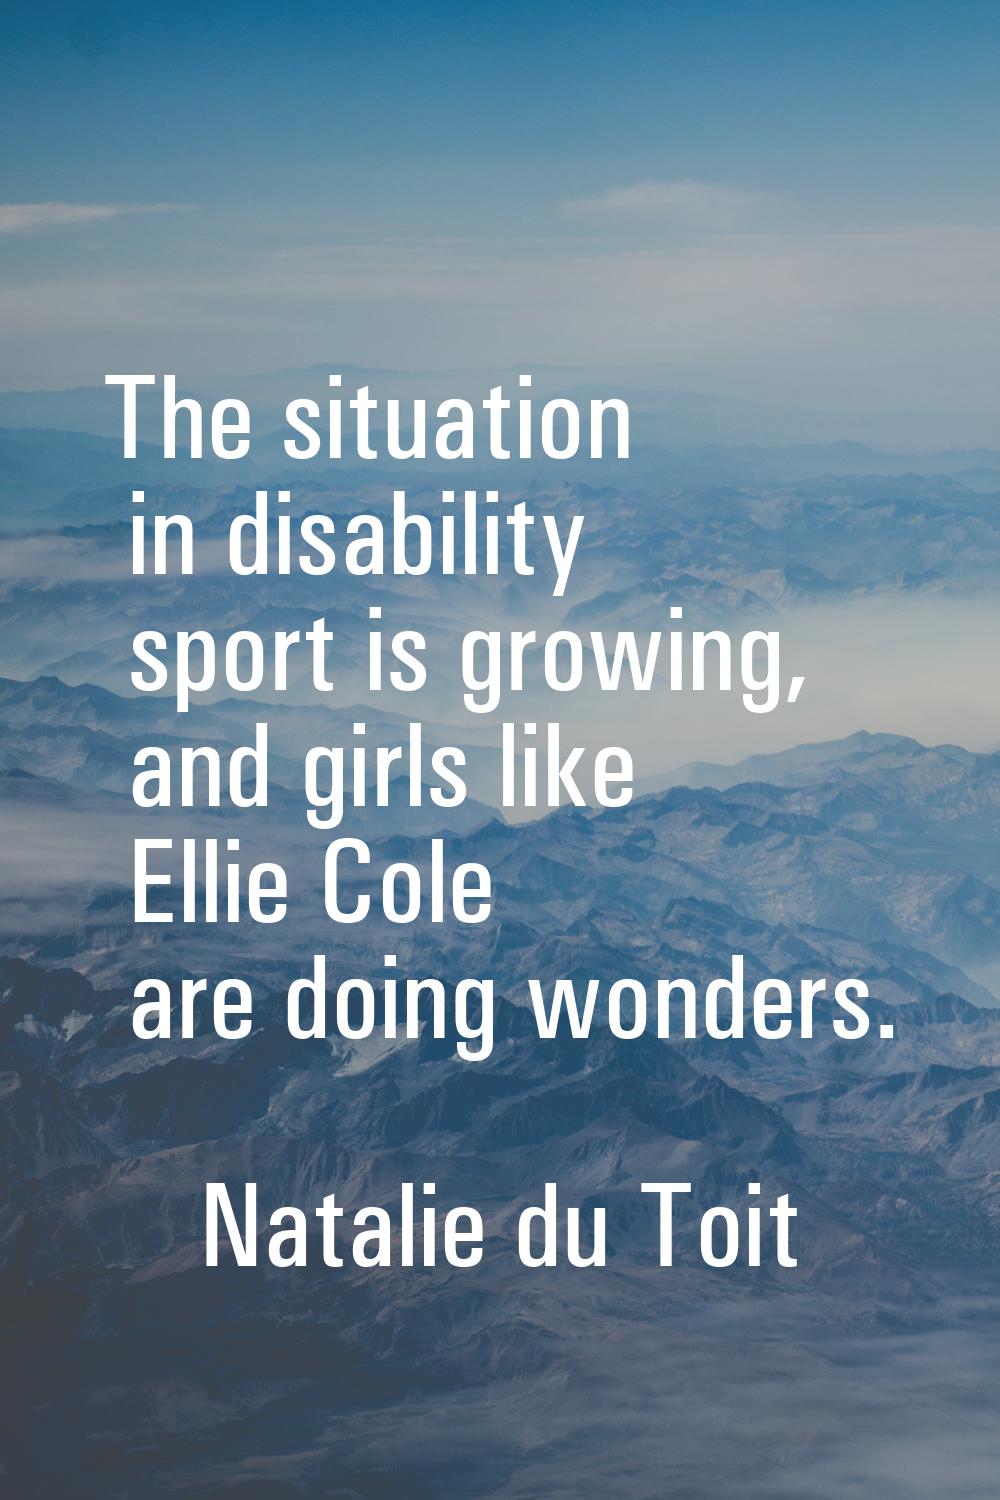 The situation in disability sport is growing, and girls like Ellie Cole are doing wonders.